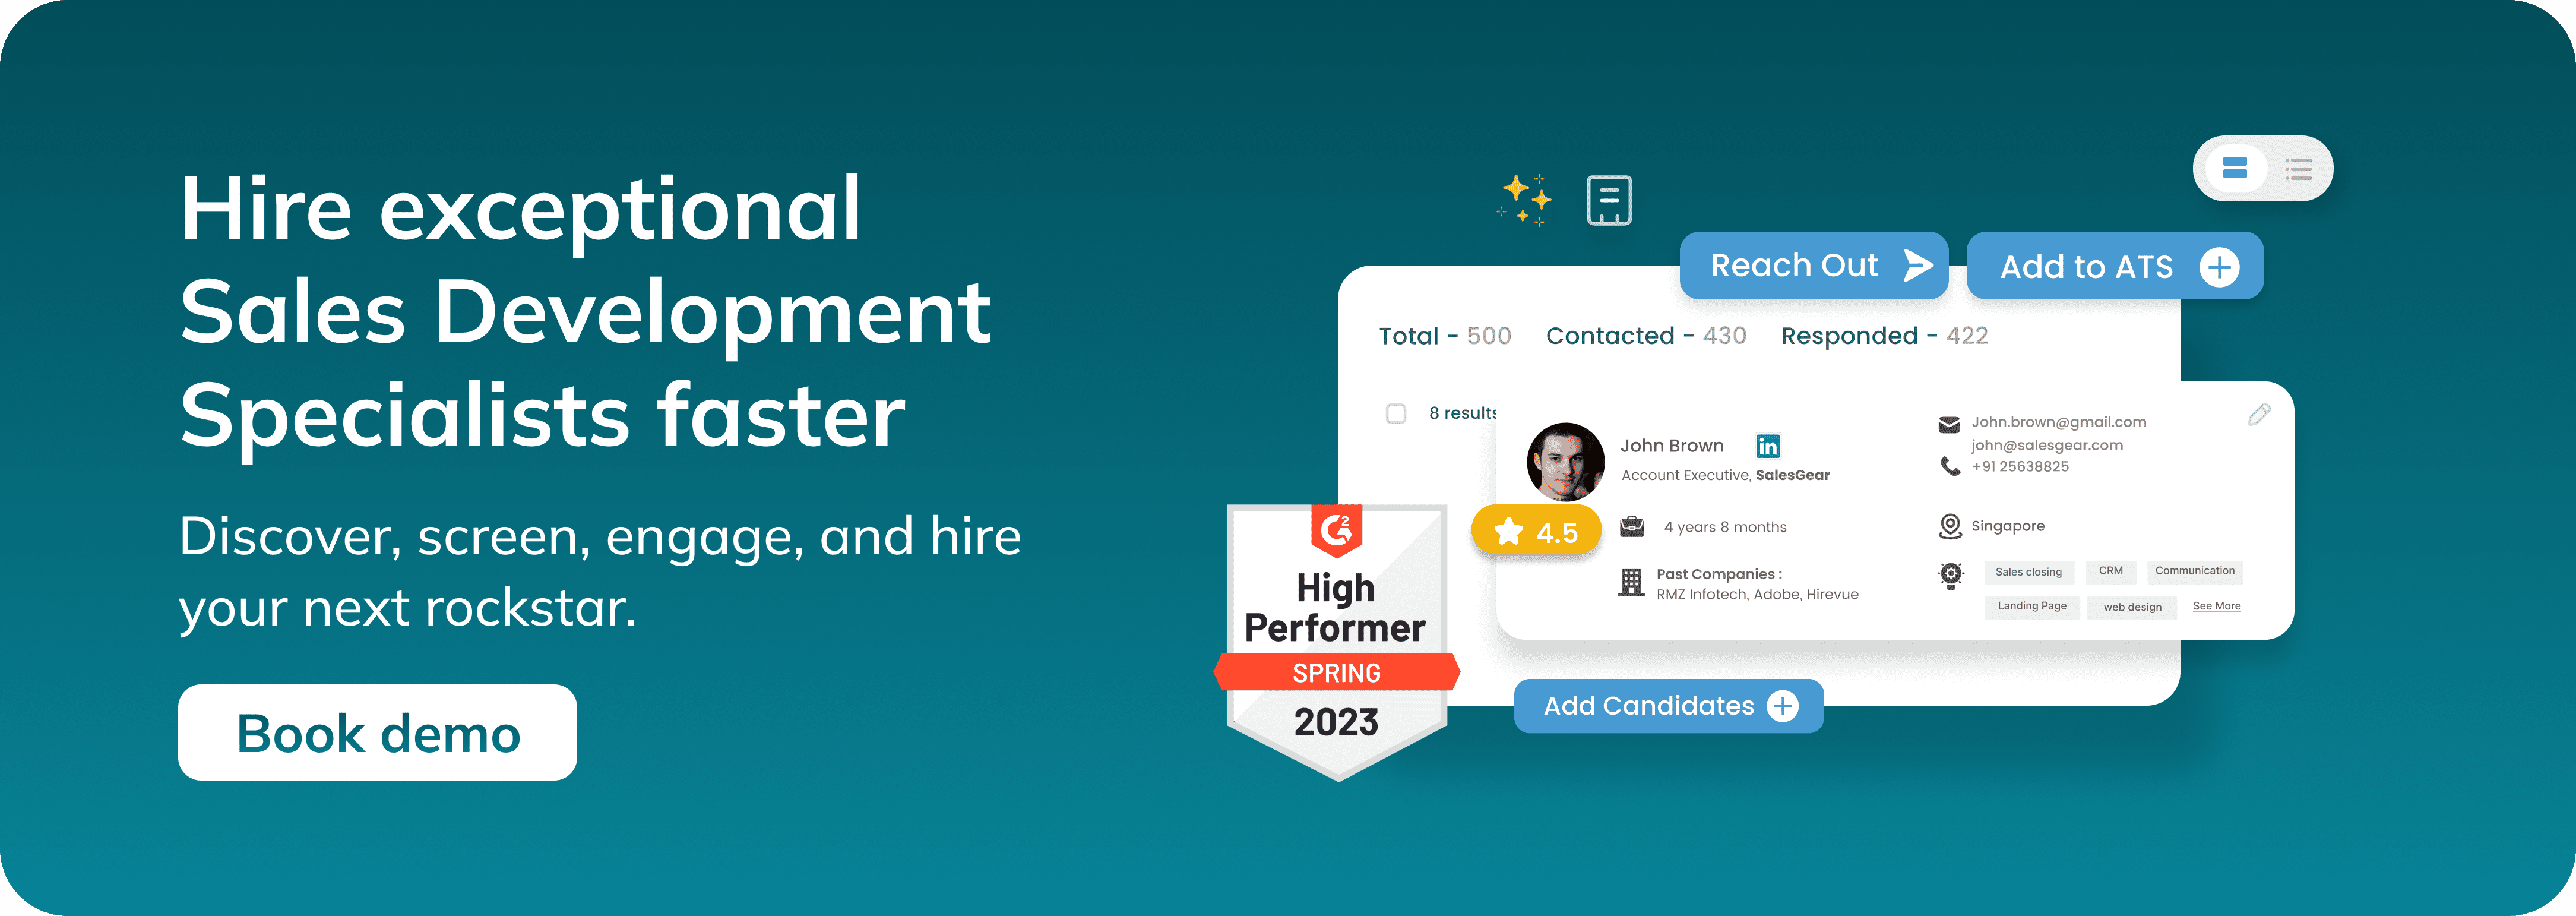 How to hire the perfect Sales Development Specialist.png